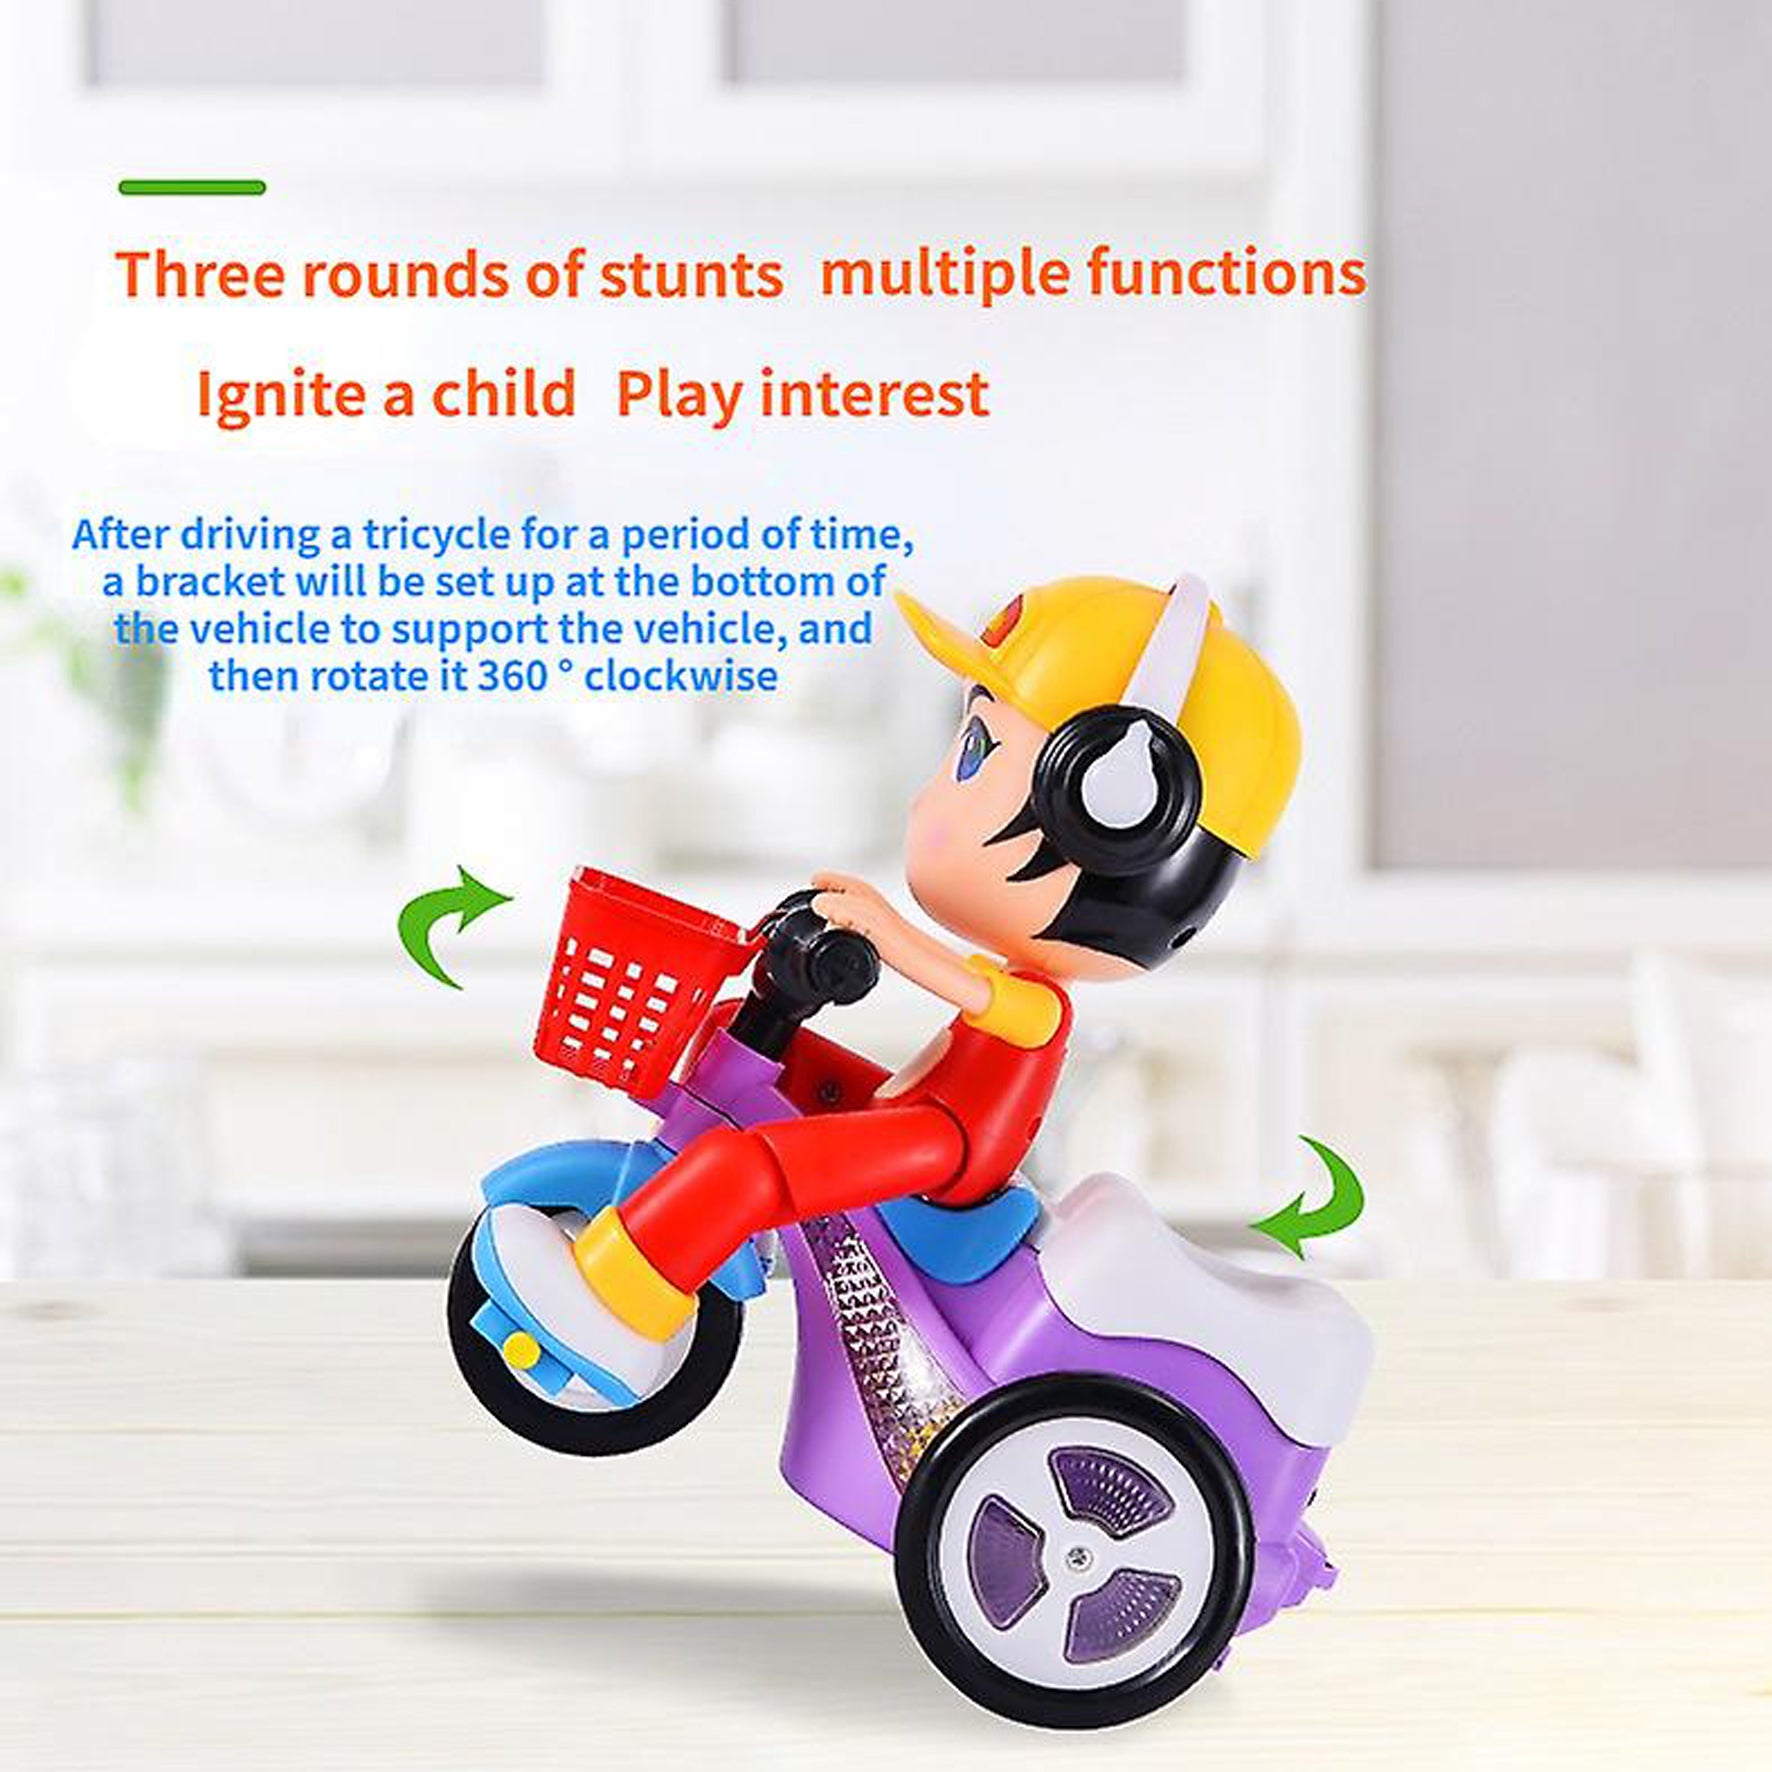 Stunt Tricycle Bump and Go Toy with 4D Lights, Dancing Toy, Battery Operated Toy Plastic for Boys Girls - Multi Color